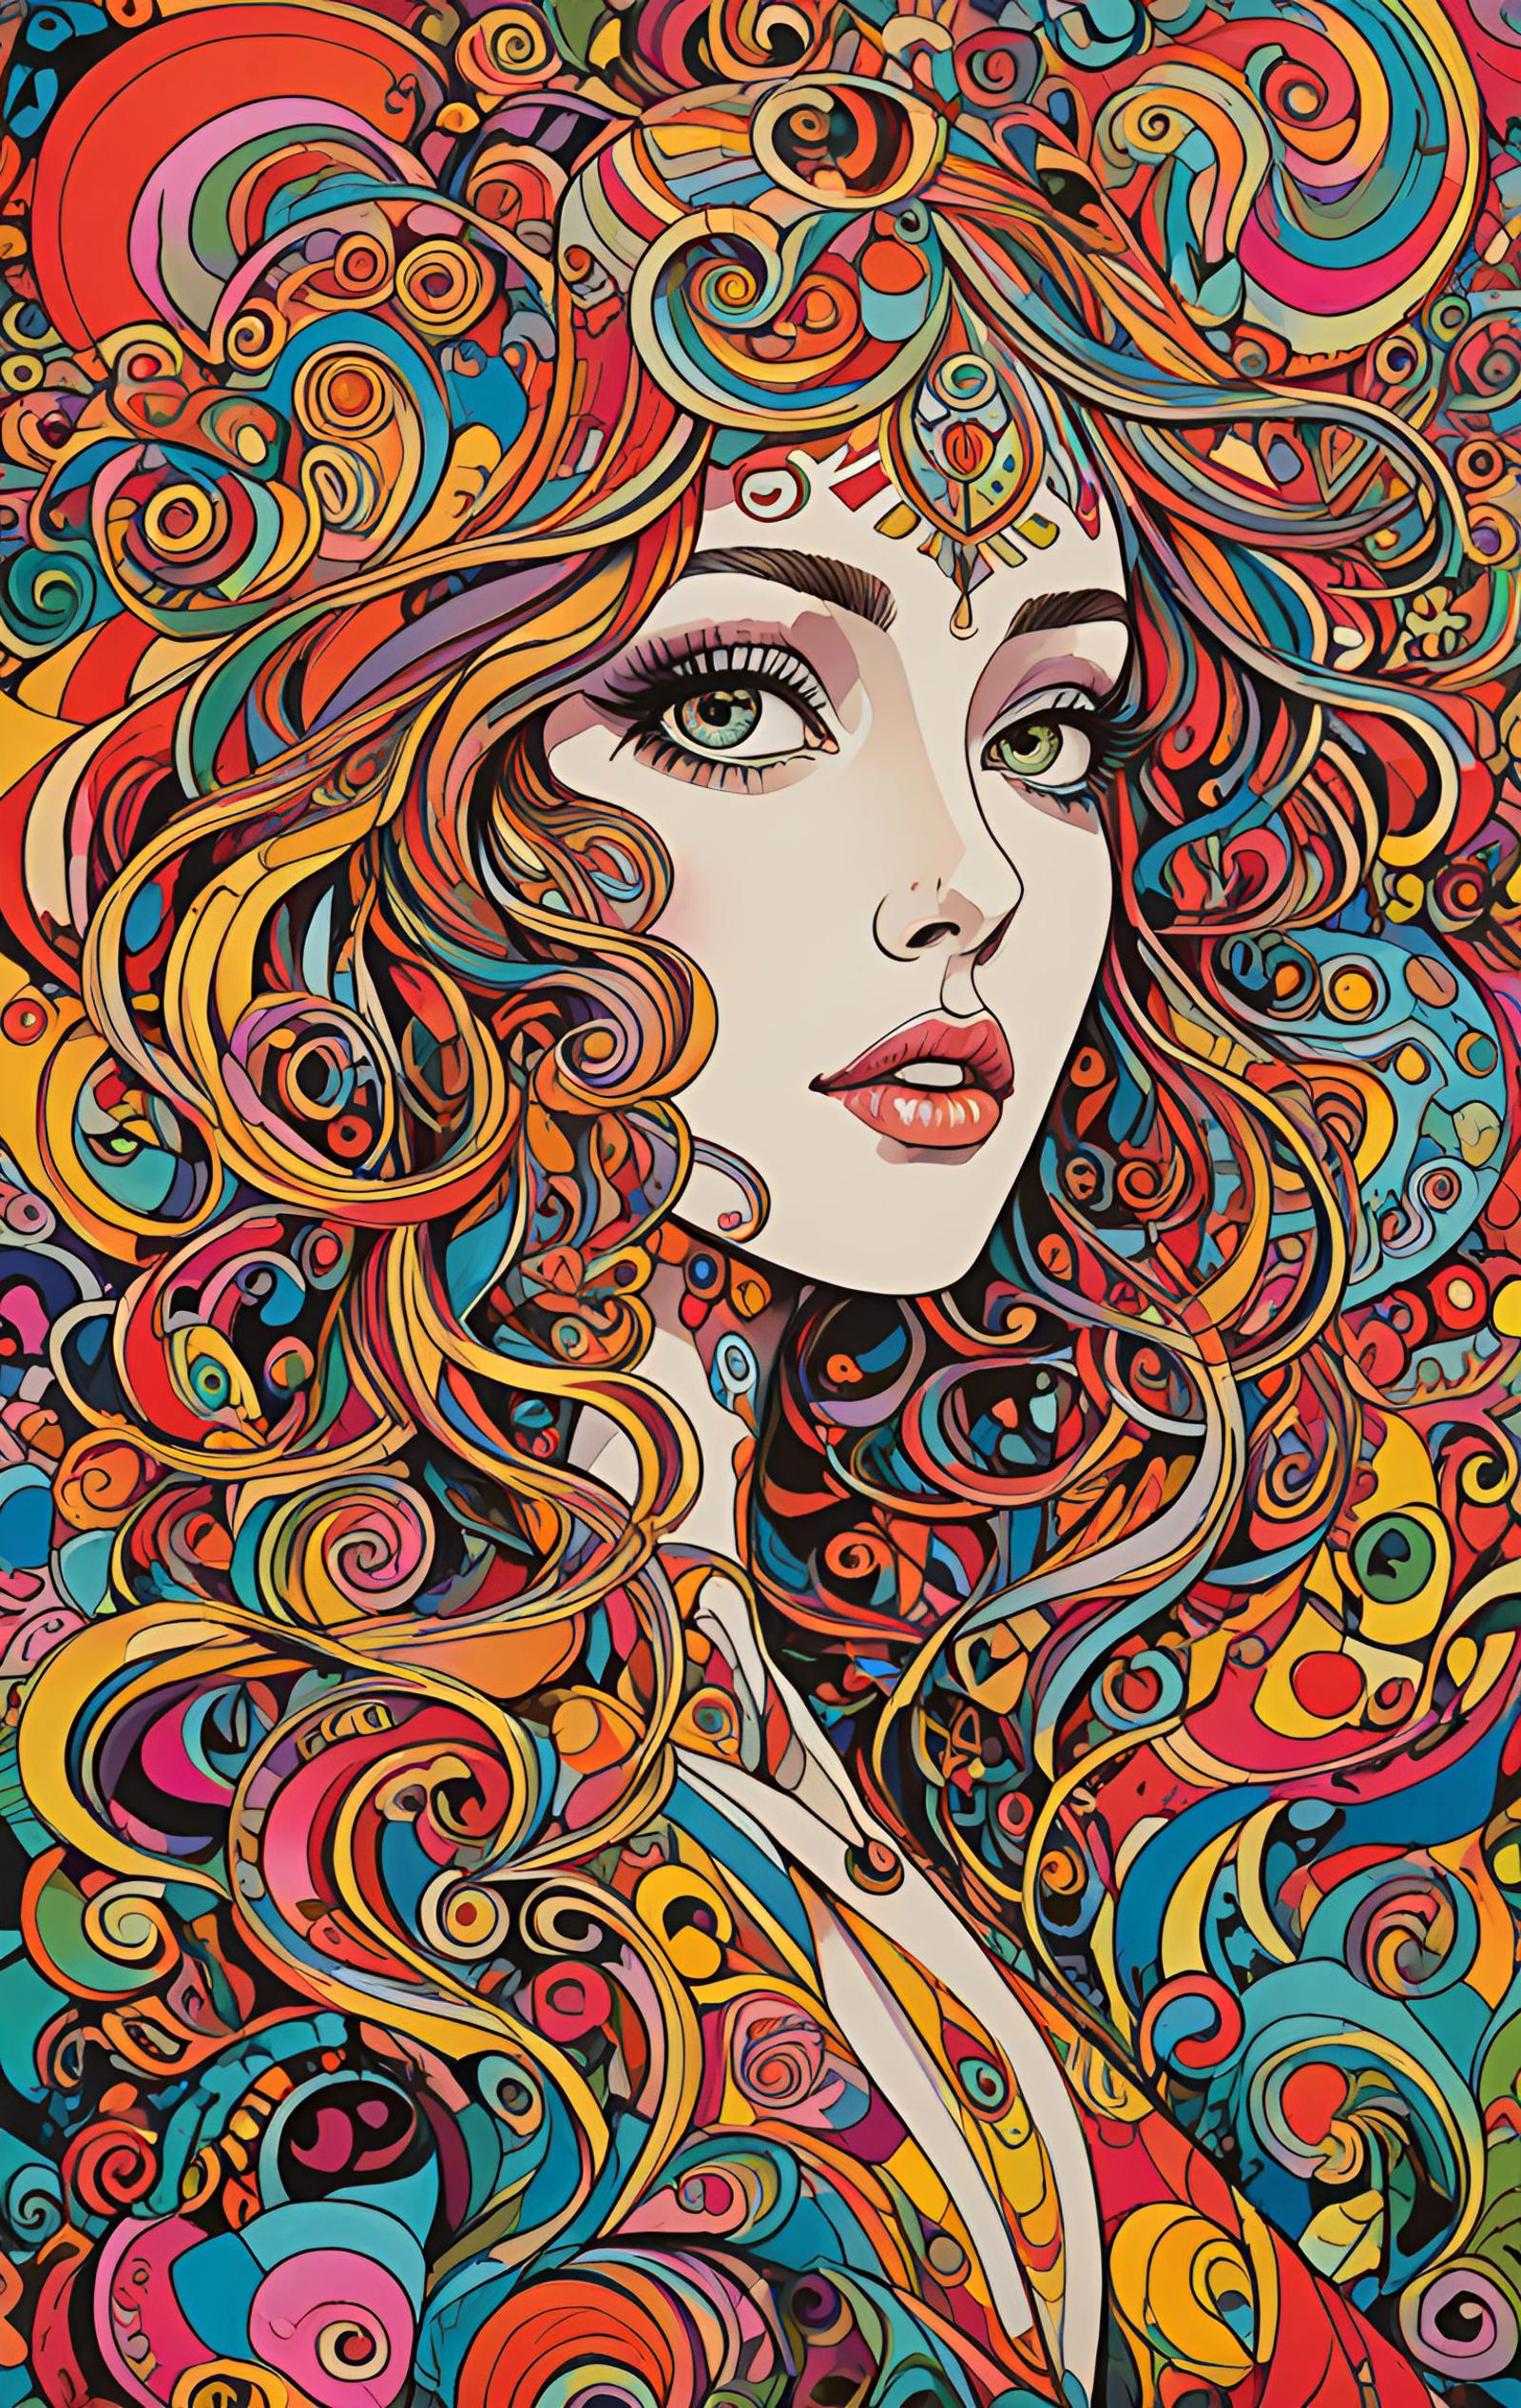 Vibrant and Colorful Artistic Illustration of a Woman with Long Hair and Green Eyes